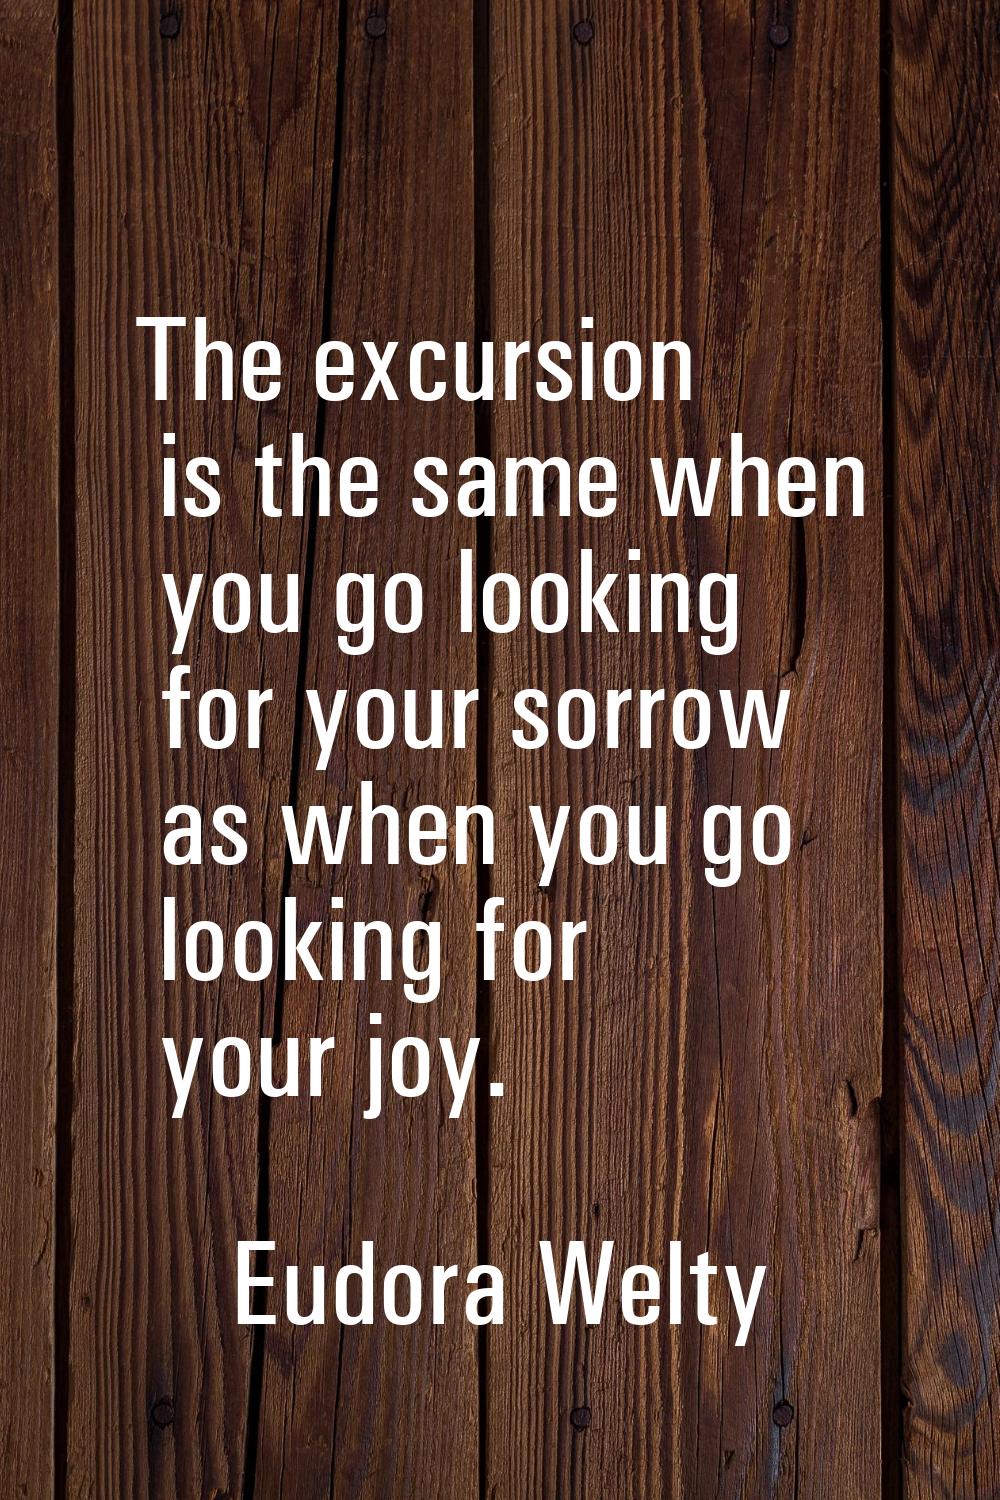 The excursion is the same when you go looking for your sorrow as when you go looking for your joy.